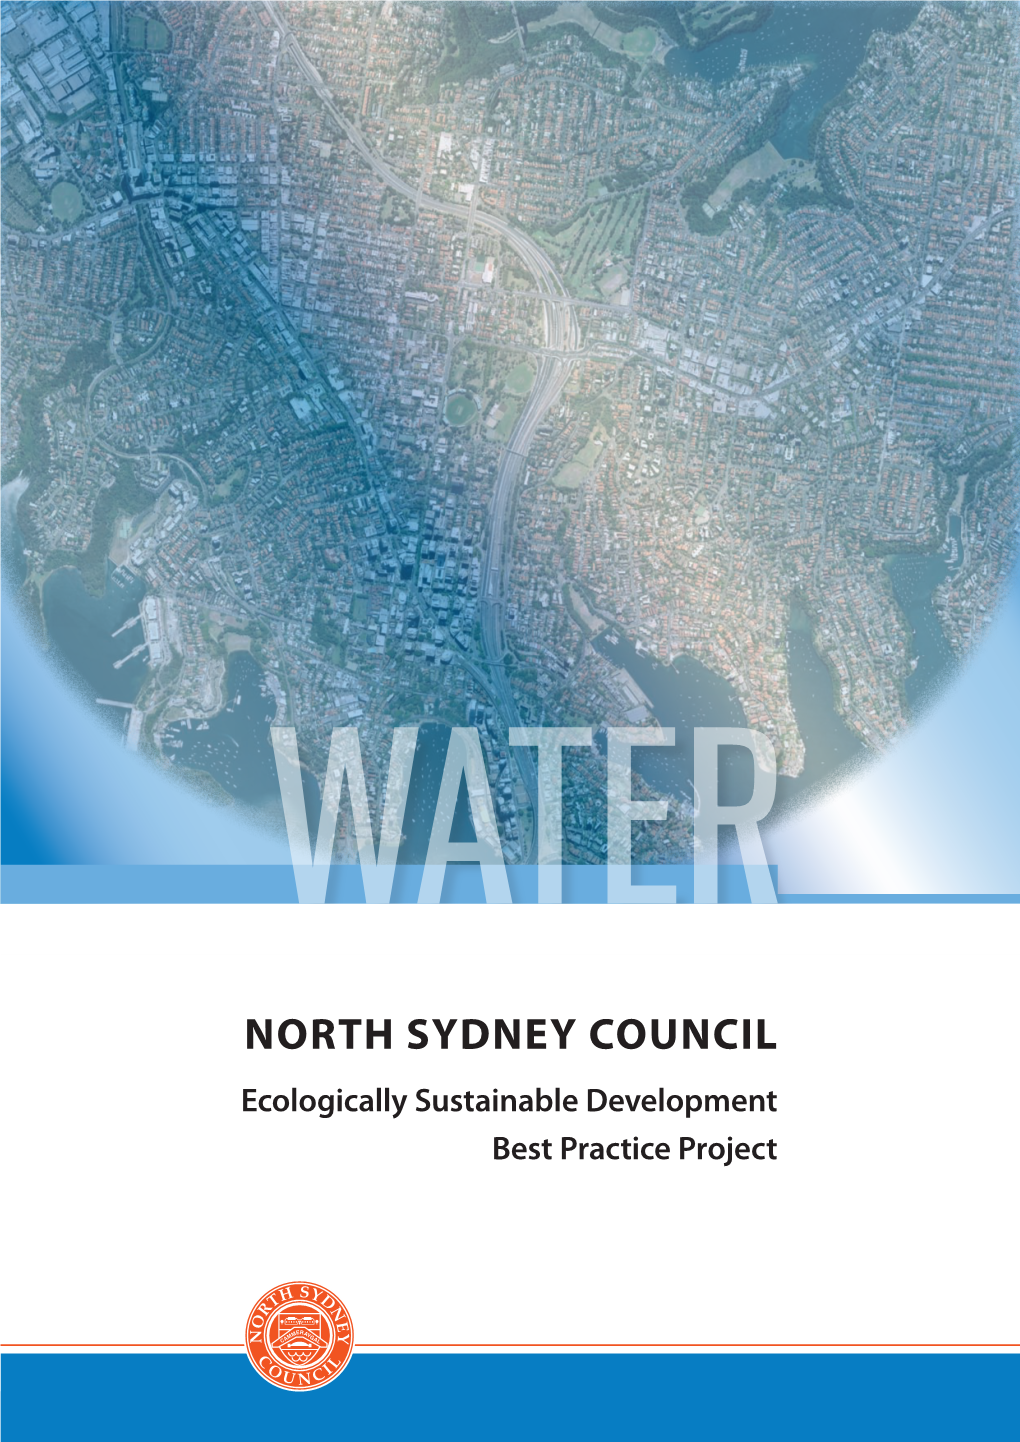 North Sydney Council Ecologically Sustainable Development Best Practice Project